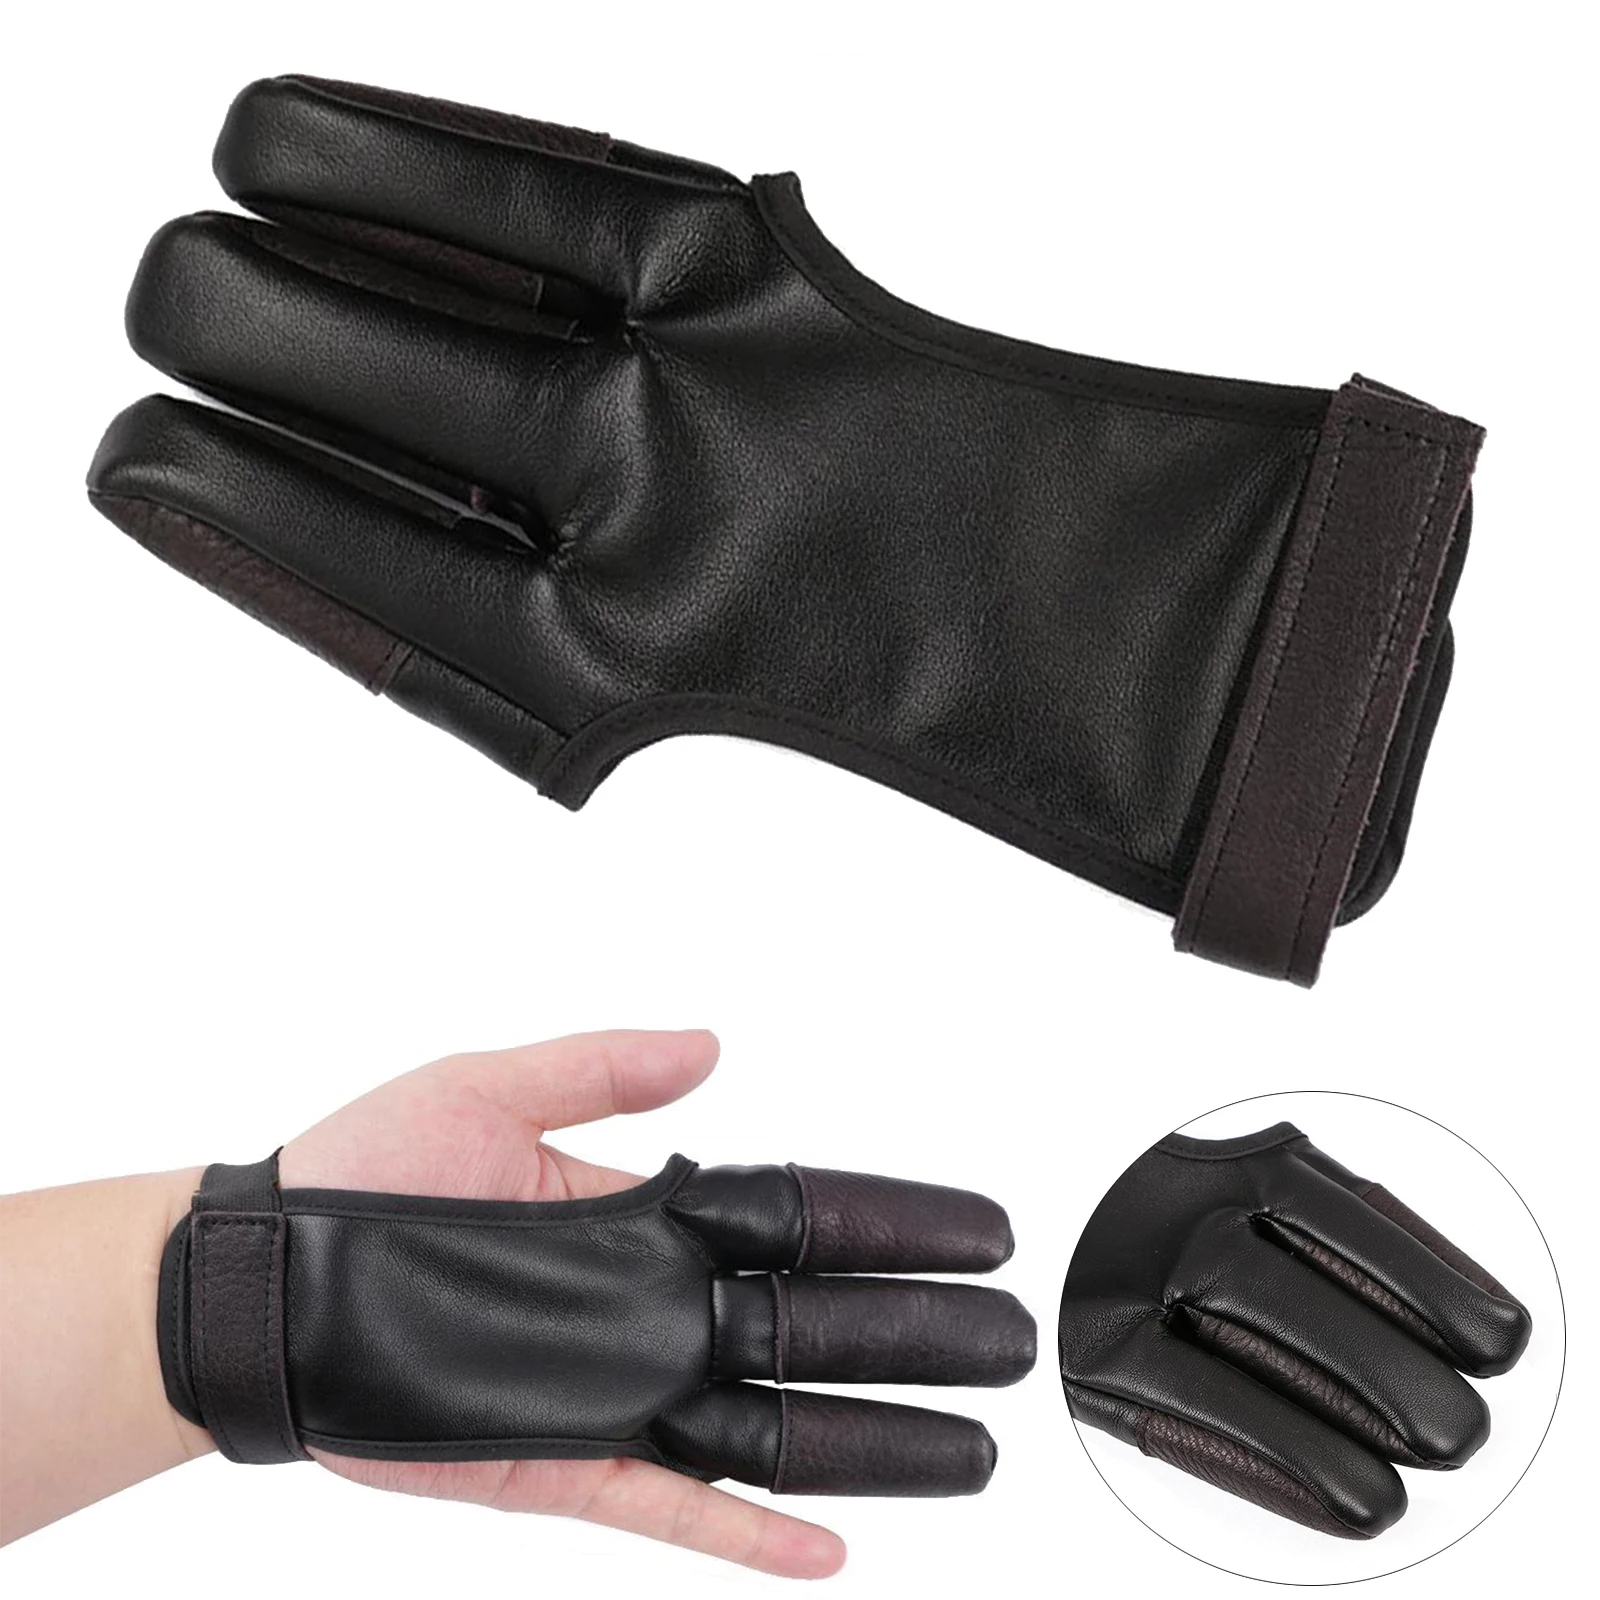 Archery 3 Finger Protect Glove Shooting Cow Leather Guard Tab Gear Bow Hunting 